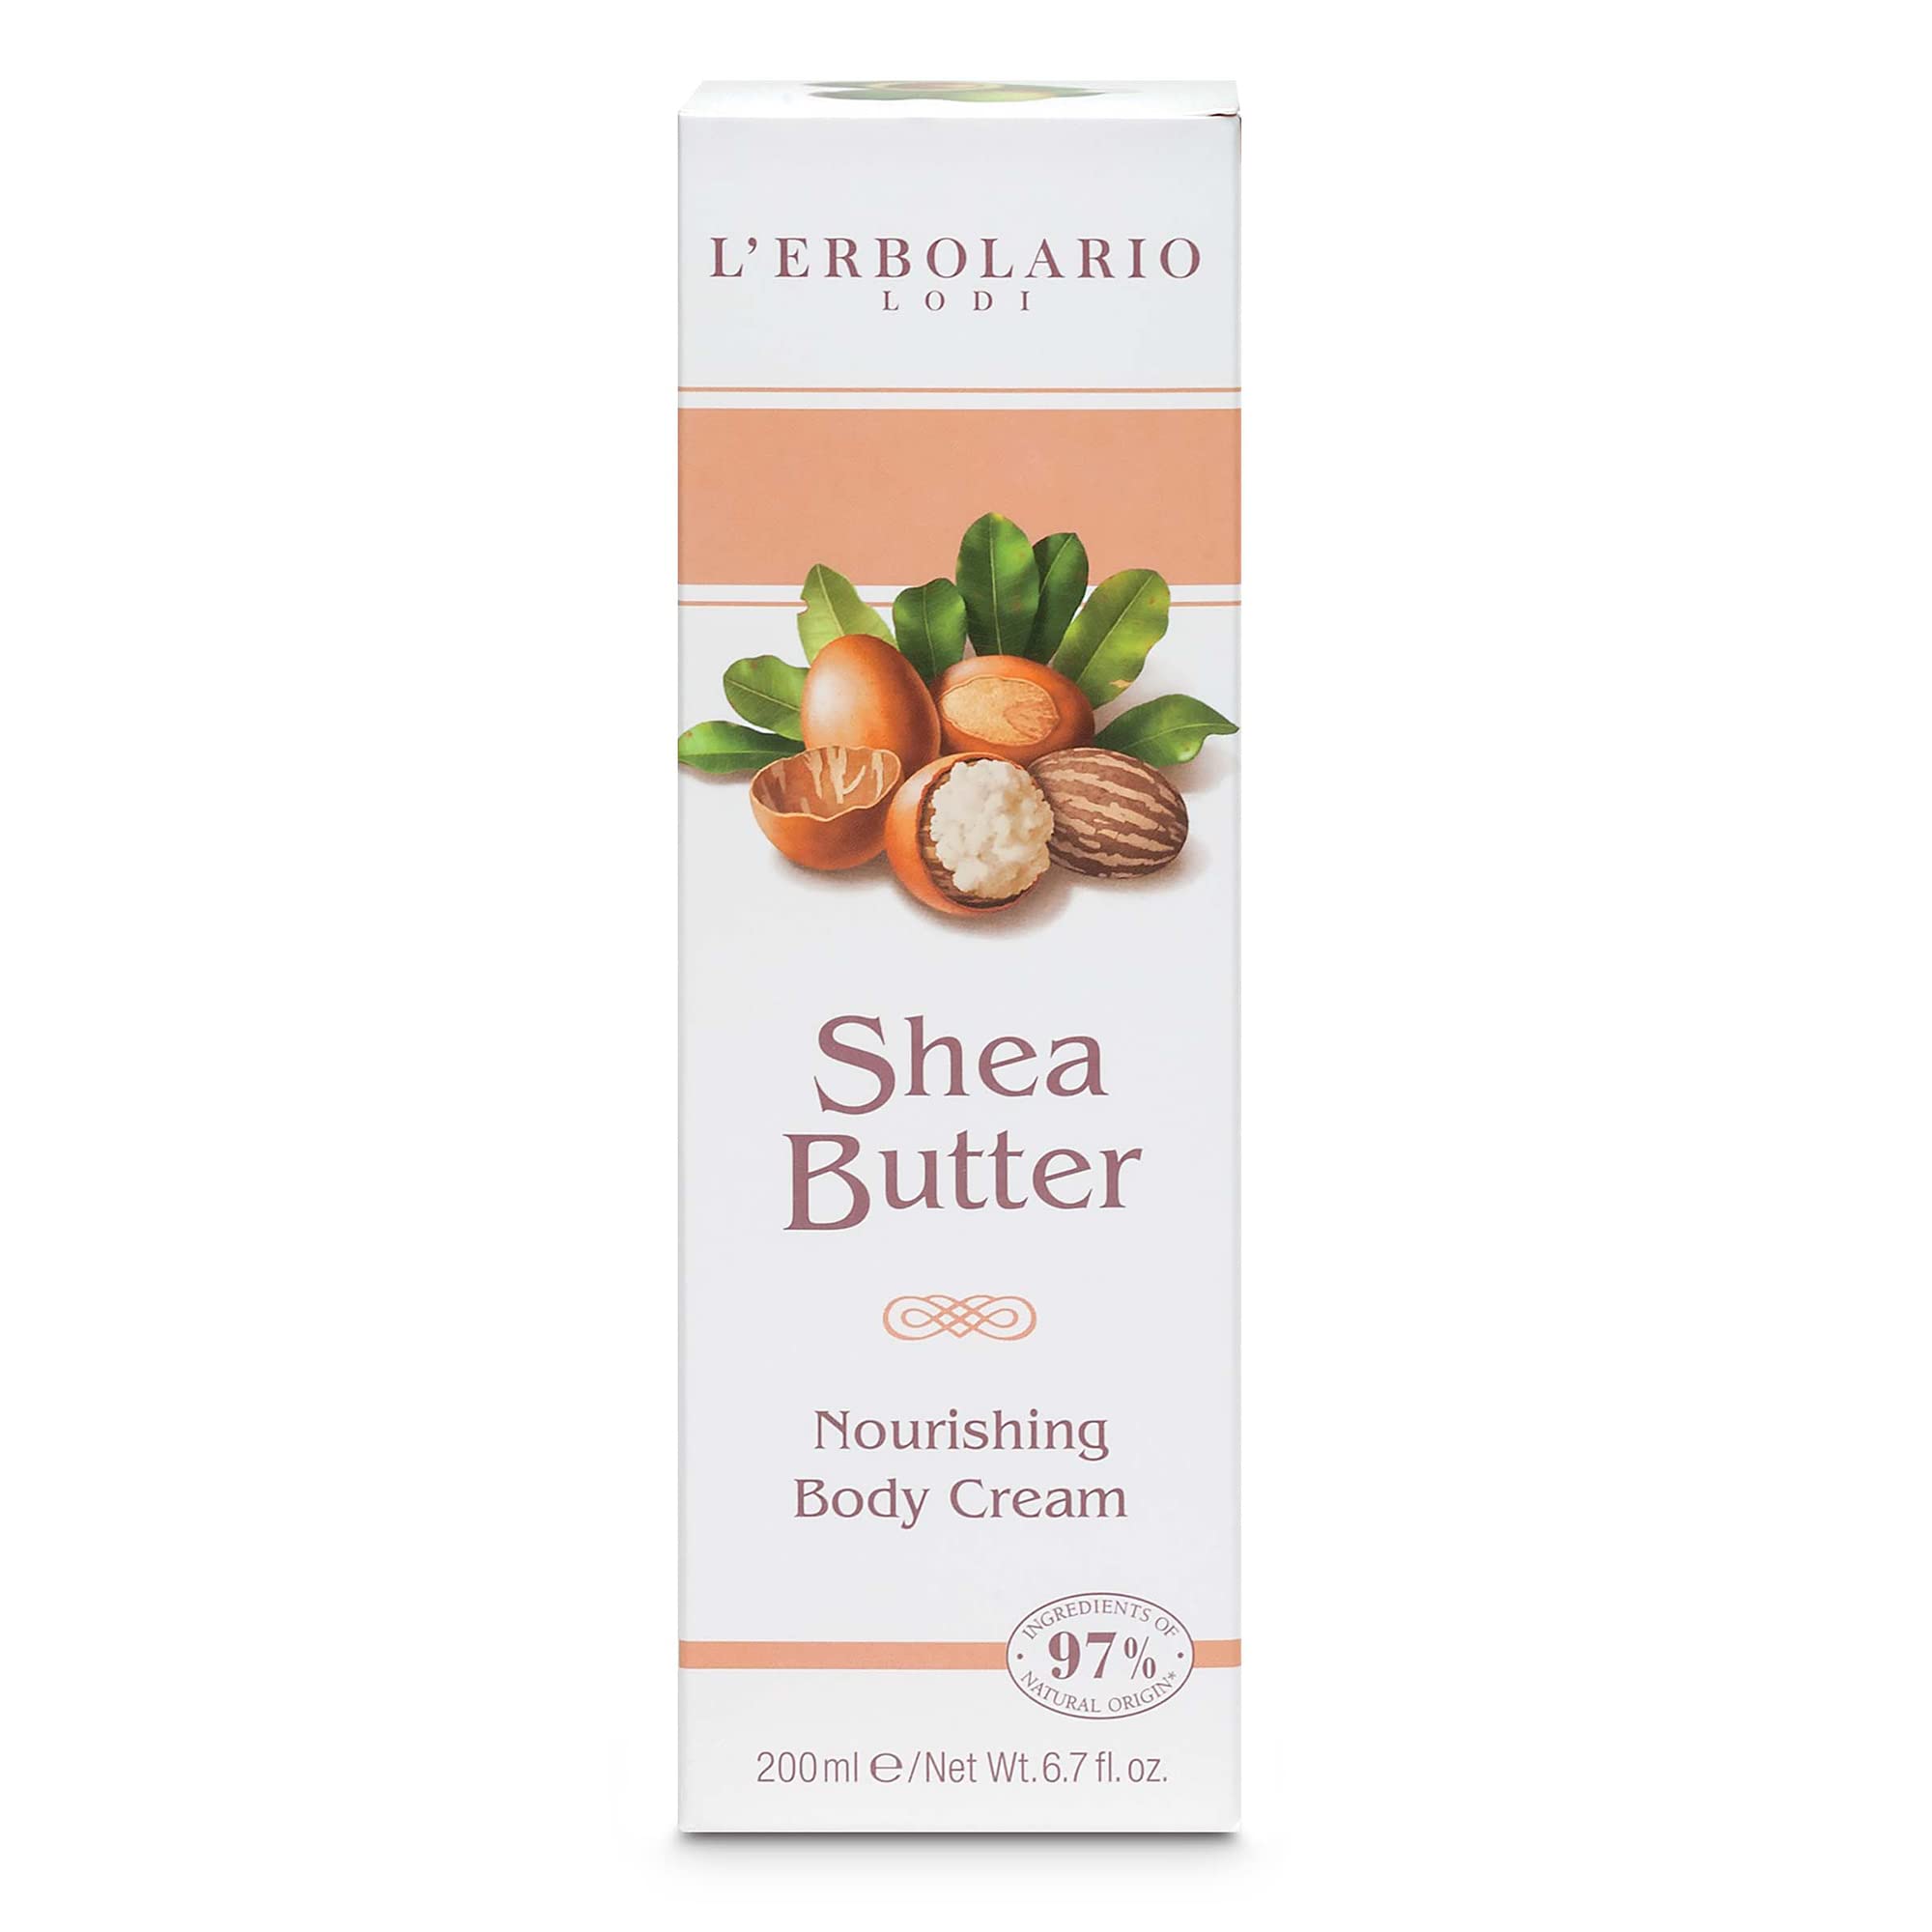 L'Erbolario Shea Butter Nourishing Hand Cream - Incredibly Revitalizing And Emollient Properties - Softens And Hydrates - Strengthens The Skin’s Barrier - Protects From External Aggressors - 6.7 Oz